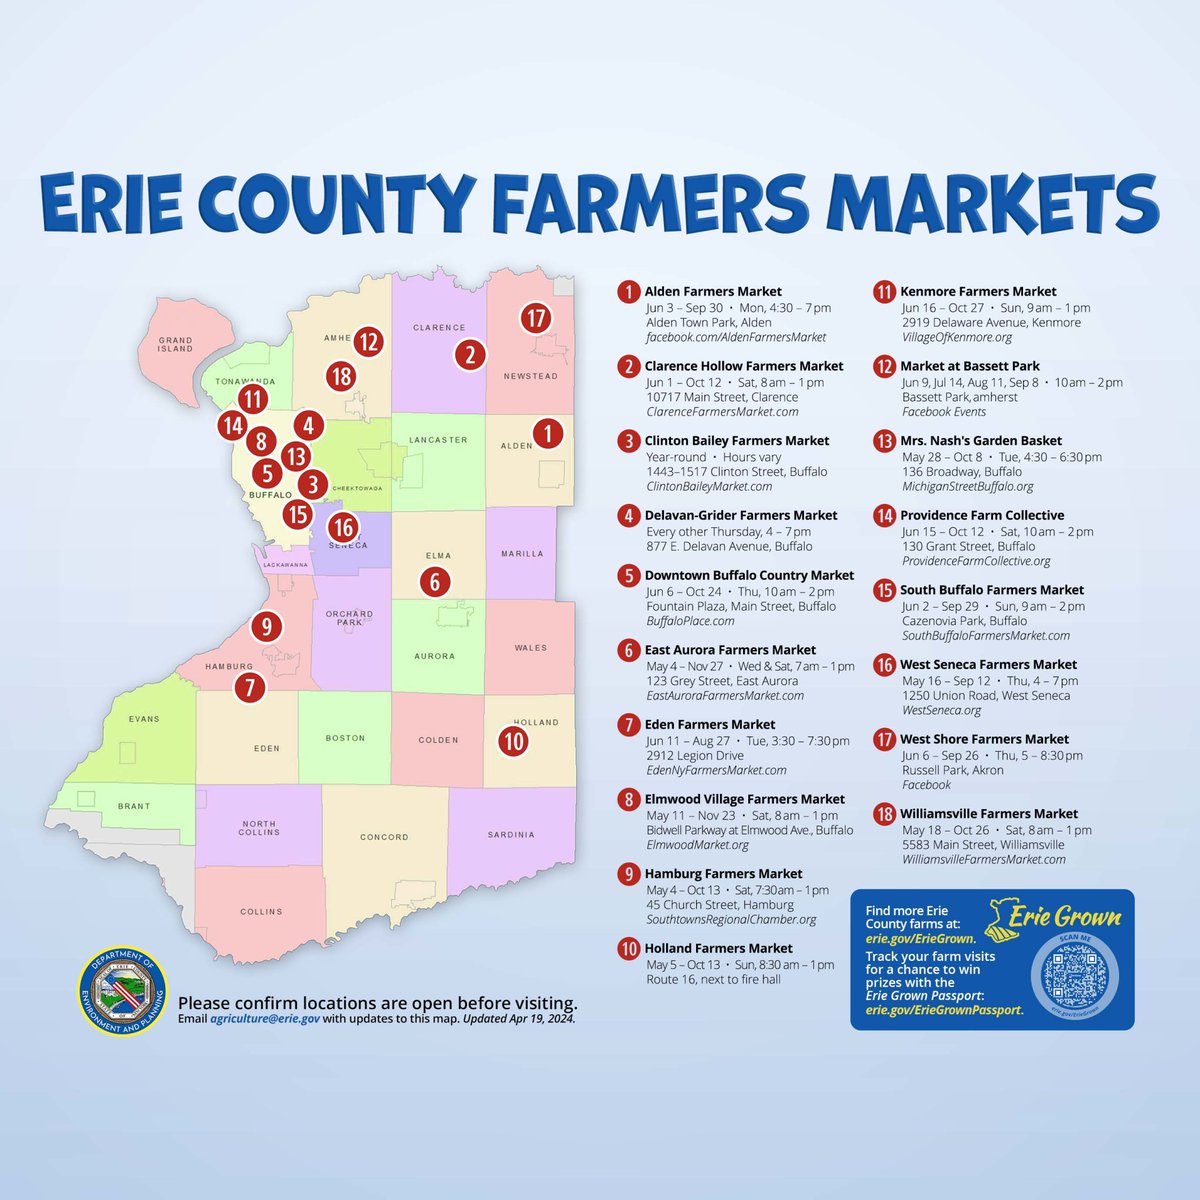 🍎🚜🌽 It's farmers market season! @ErieCoDEP reminds you to check their Farmers Markets map for local markets & hours of operation. Also, find farms & in-season produce. Visit erie.gov/eriegrown for more. And sign-up for the Erie Grown Passport—earn points & win prizes!